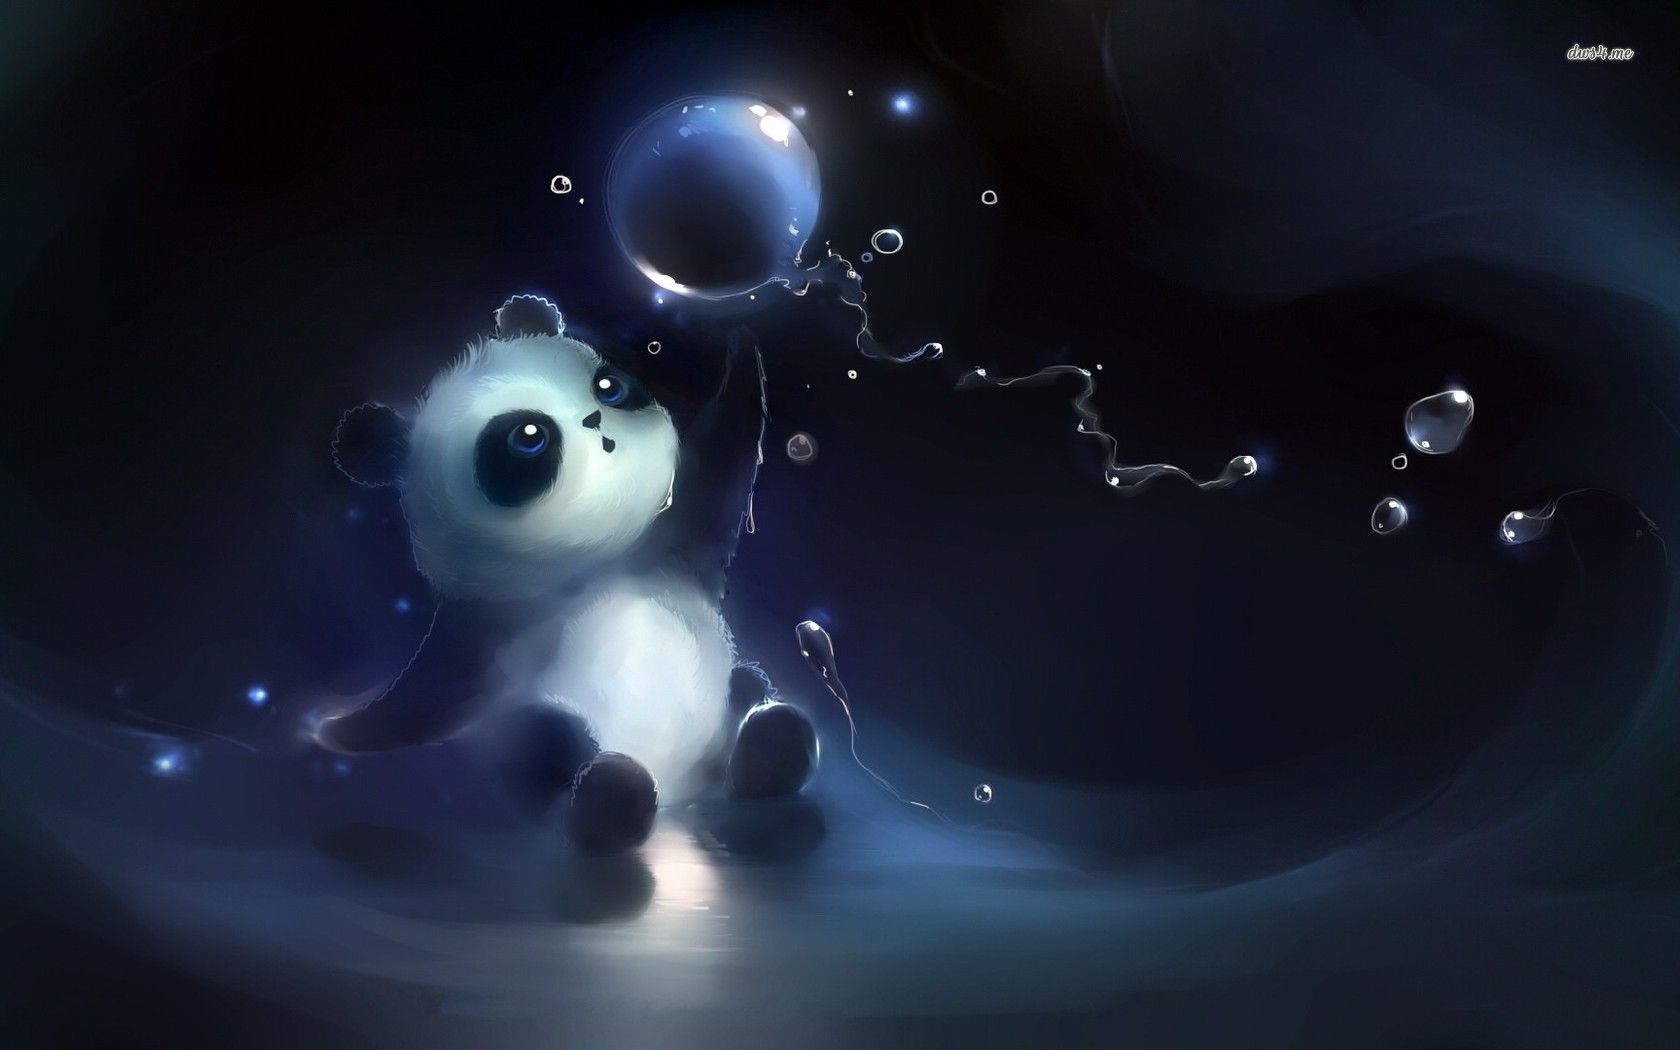 Cute panda playing with bubbles wallpaper - Artistic wallpapers ...